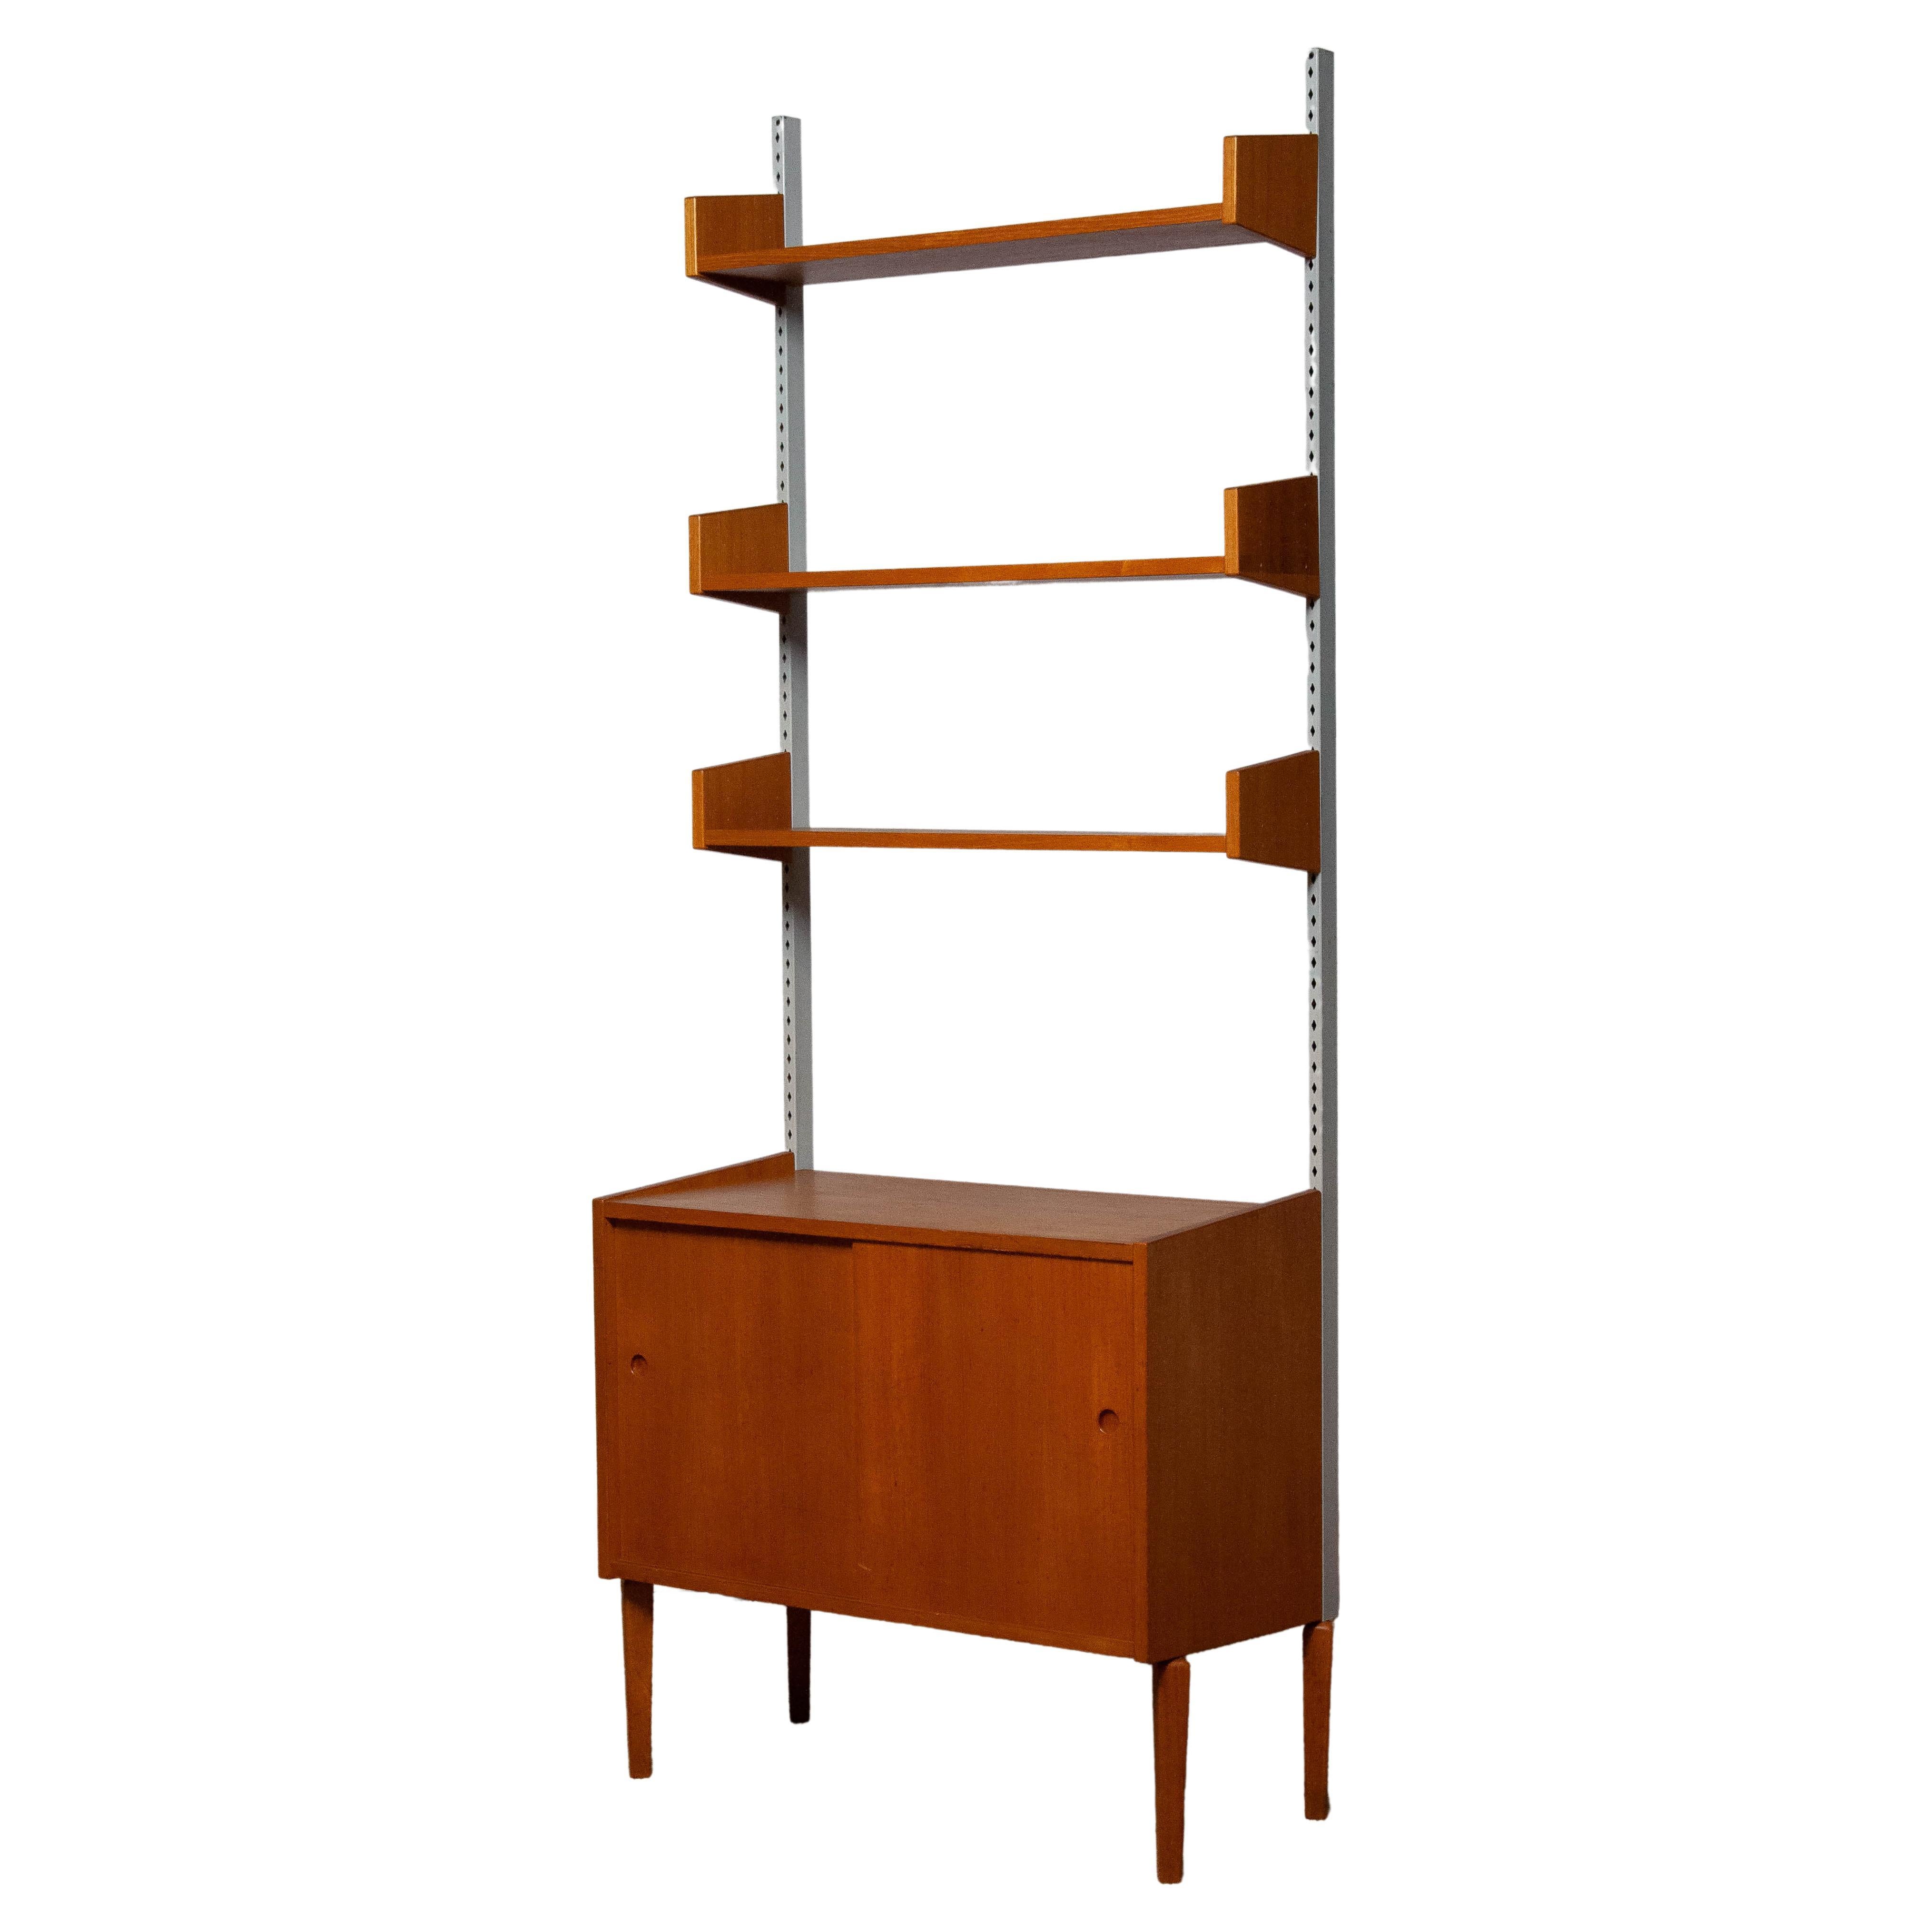 1950's Teak Shelf System / Bookcase in Teak with Steel Bars by Harald Lundqvist For Sale